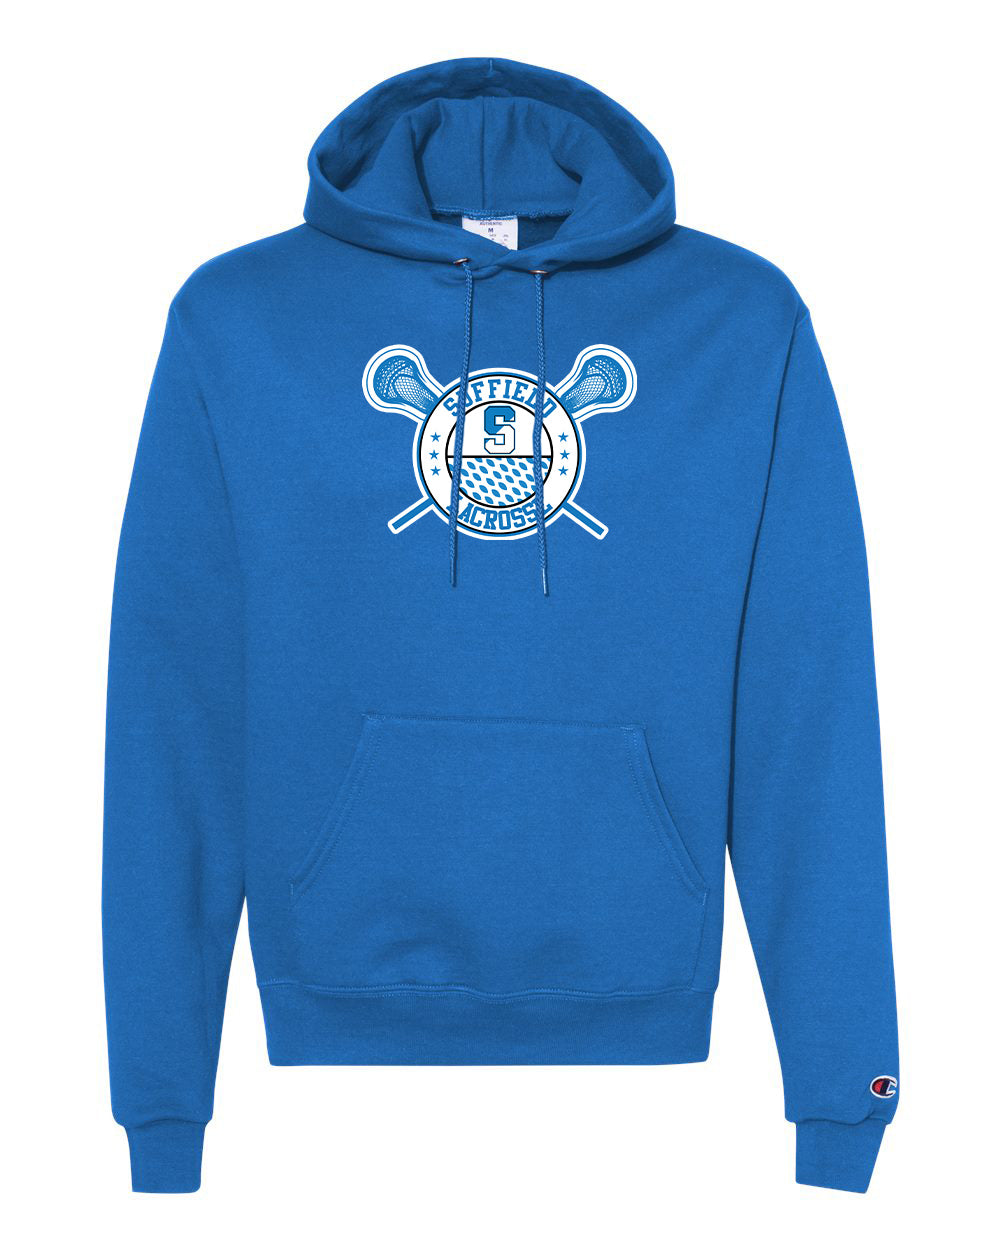 Copy of Suffield Youth Lacrosse - Adult Champion Hoodie "Circle" - S700 (color options available)